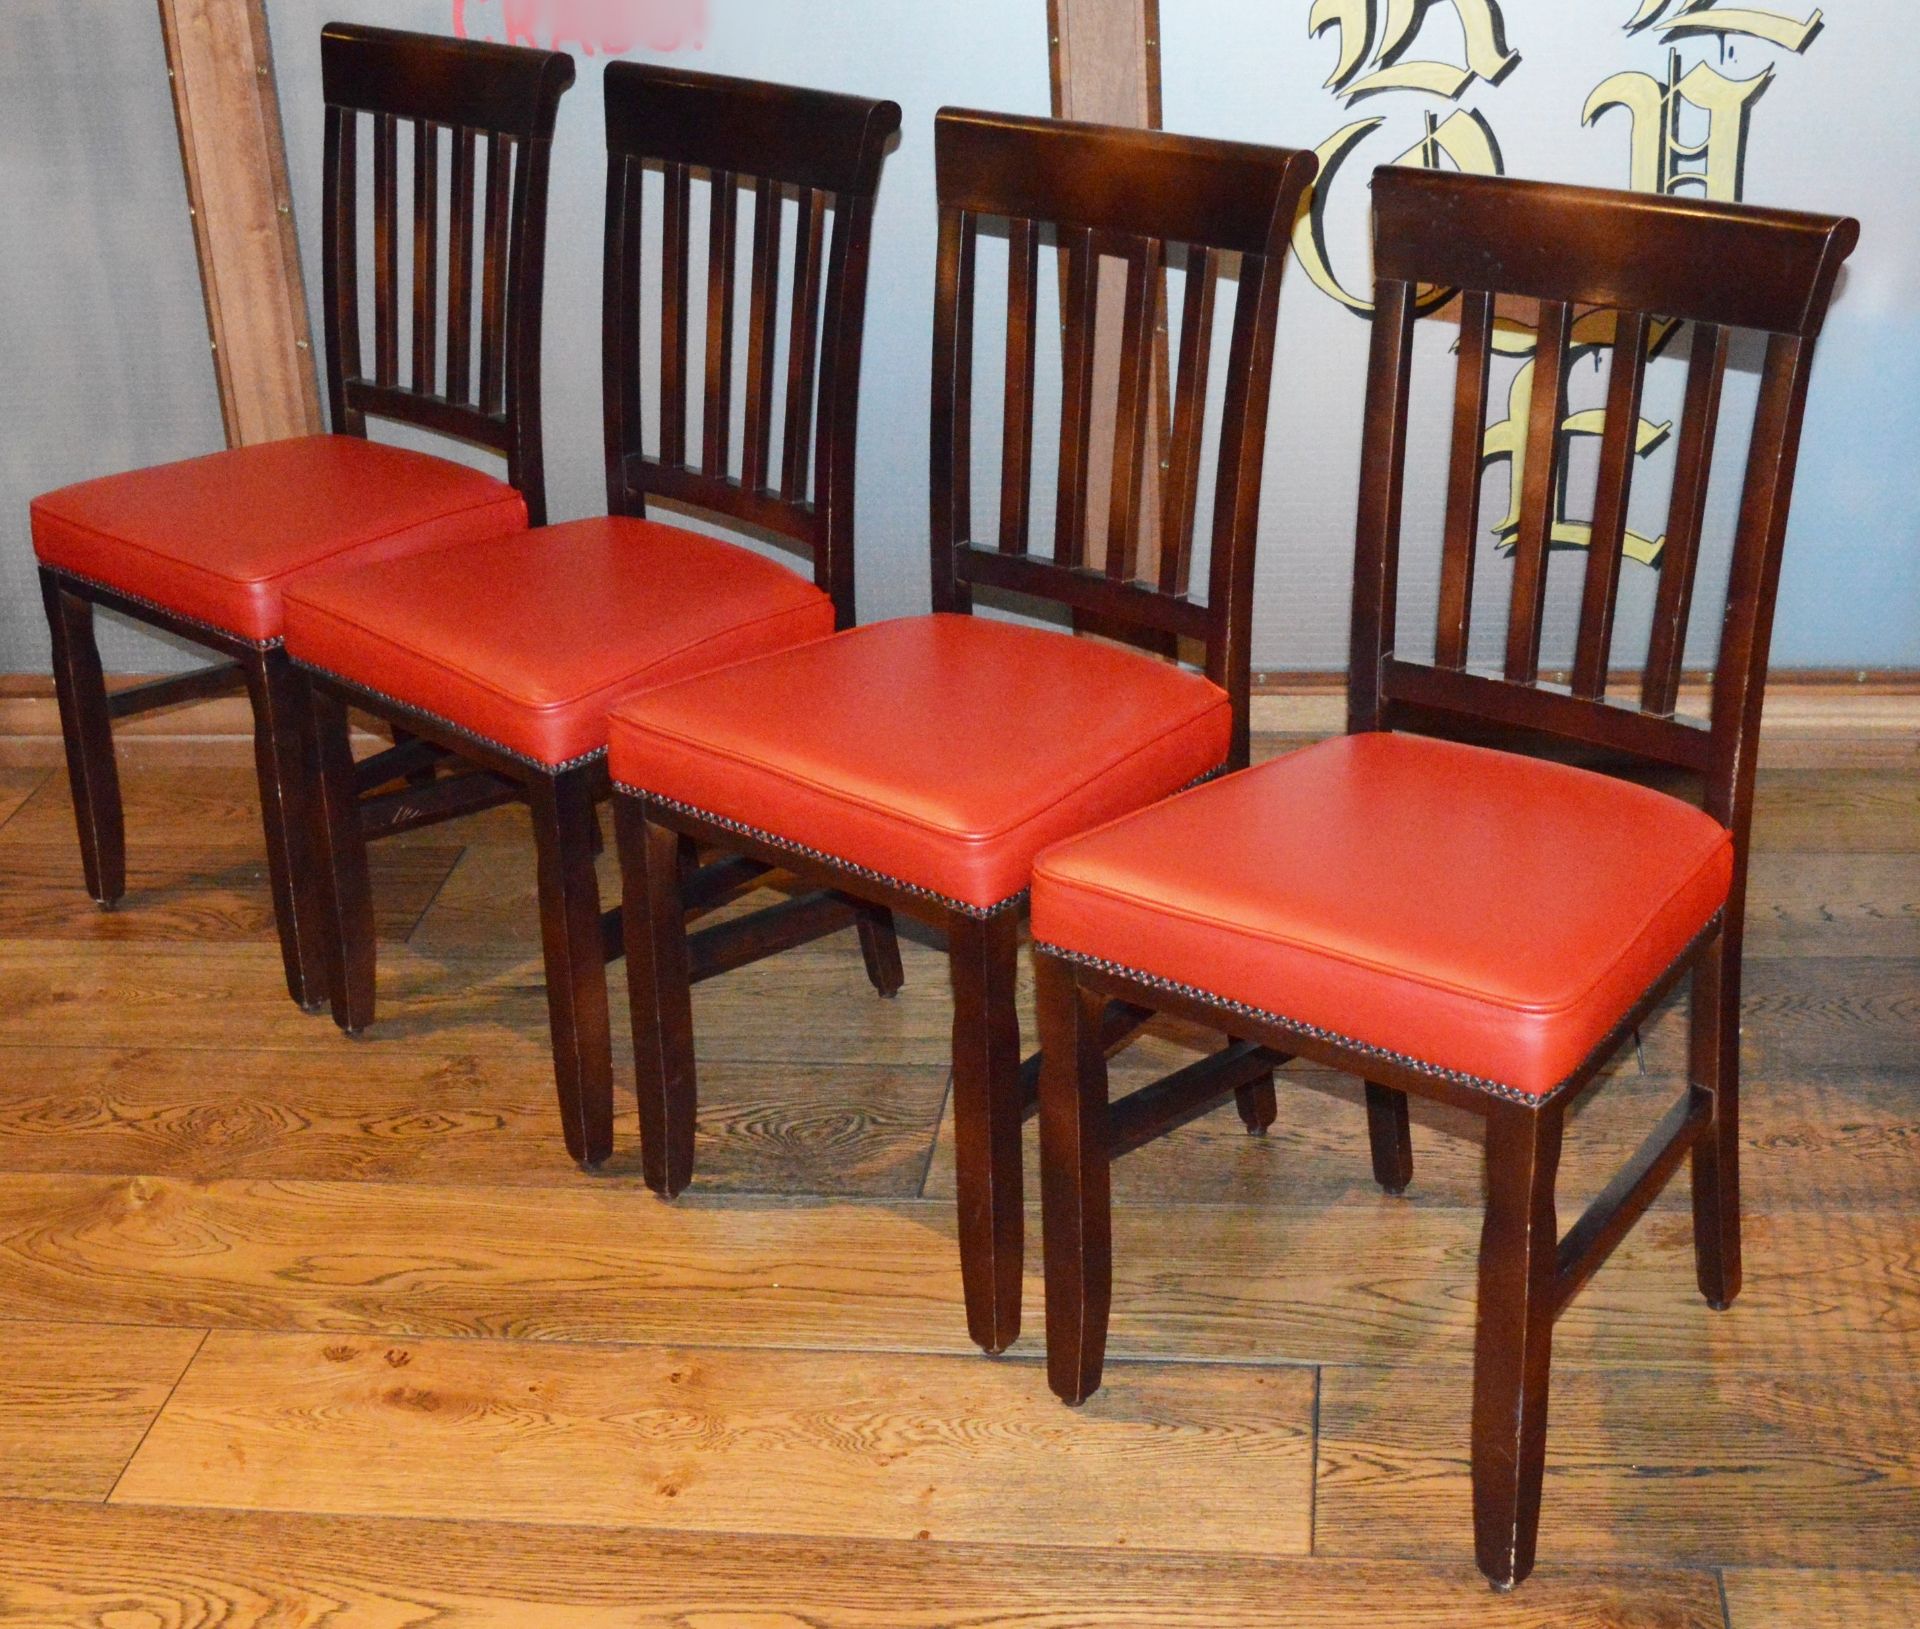 4 x Harley Chairs With Hardwoord Frames - Height 90 x Width 44 x Depth 39 cms - Seat Height 48 cms - Image 4 of 5